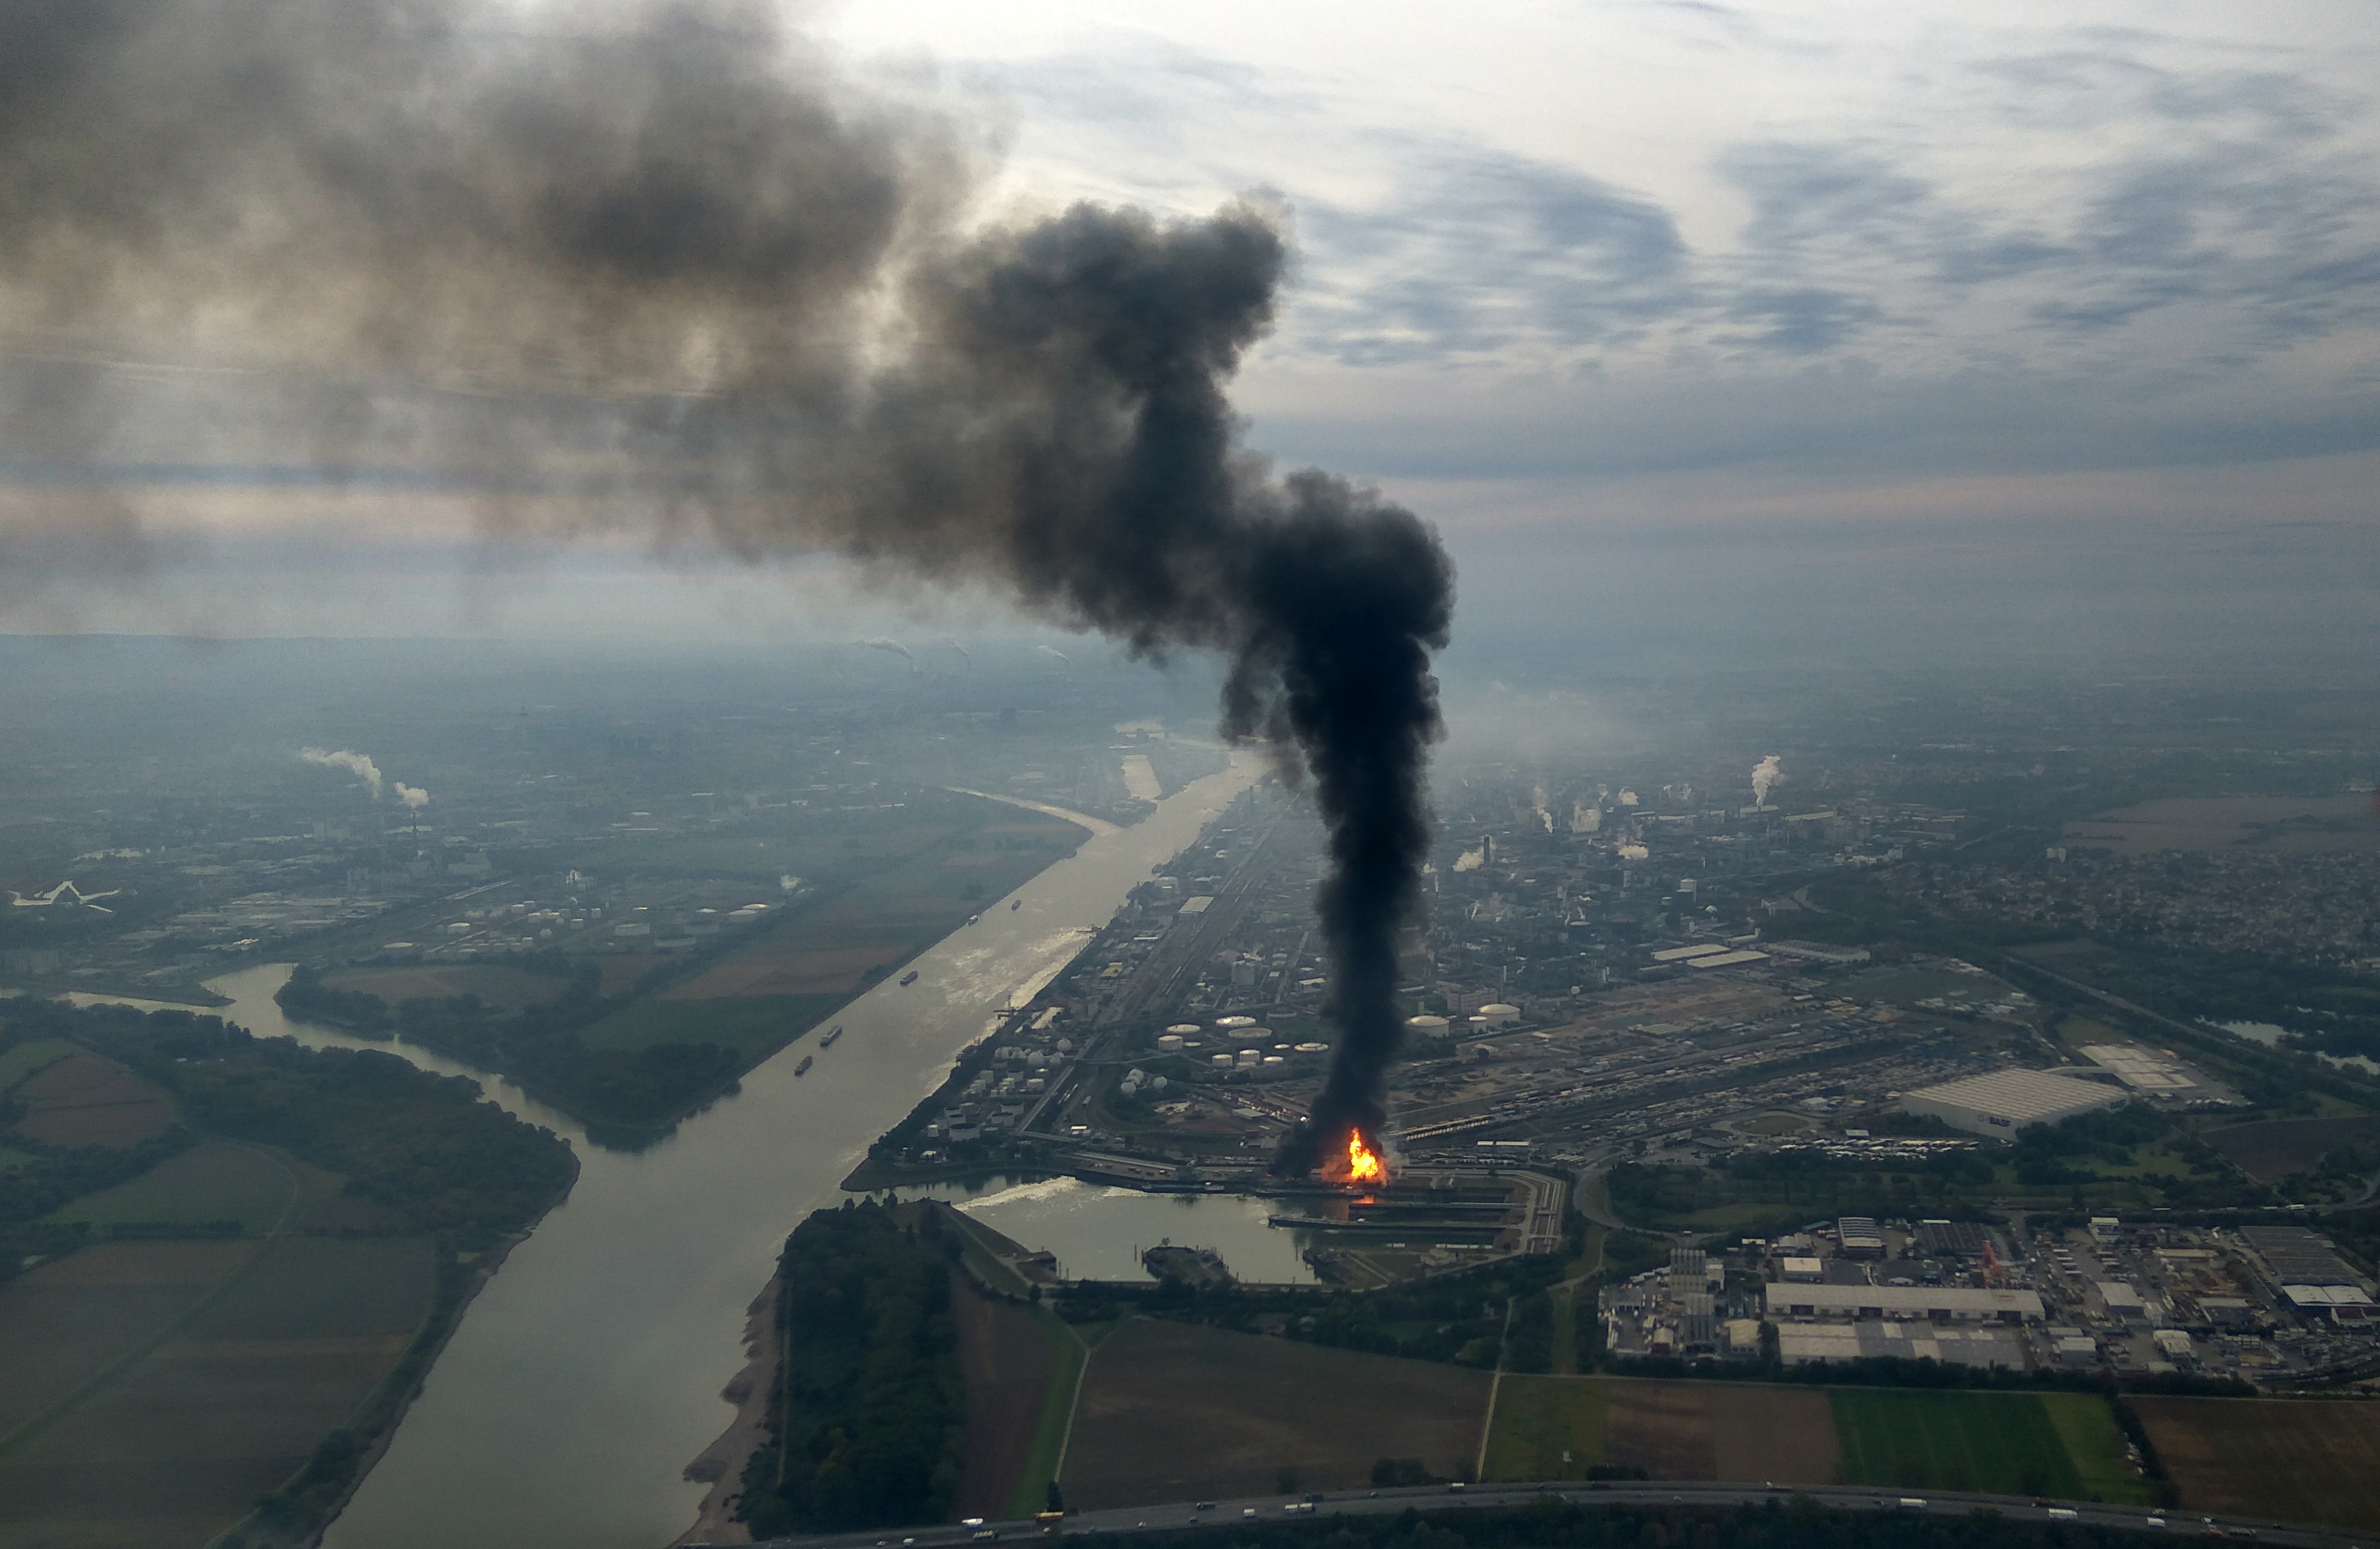 A huge cloud of dark smoke seen  at the BASF chemical plant site in  Ludwigshafen, Germany, Monday Oct. 17,  2016. The company said that several people were injured in a late-morning explosion.  ( Ulli Ziegenfuss/dpa via AP)